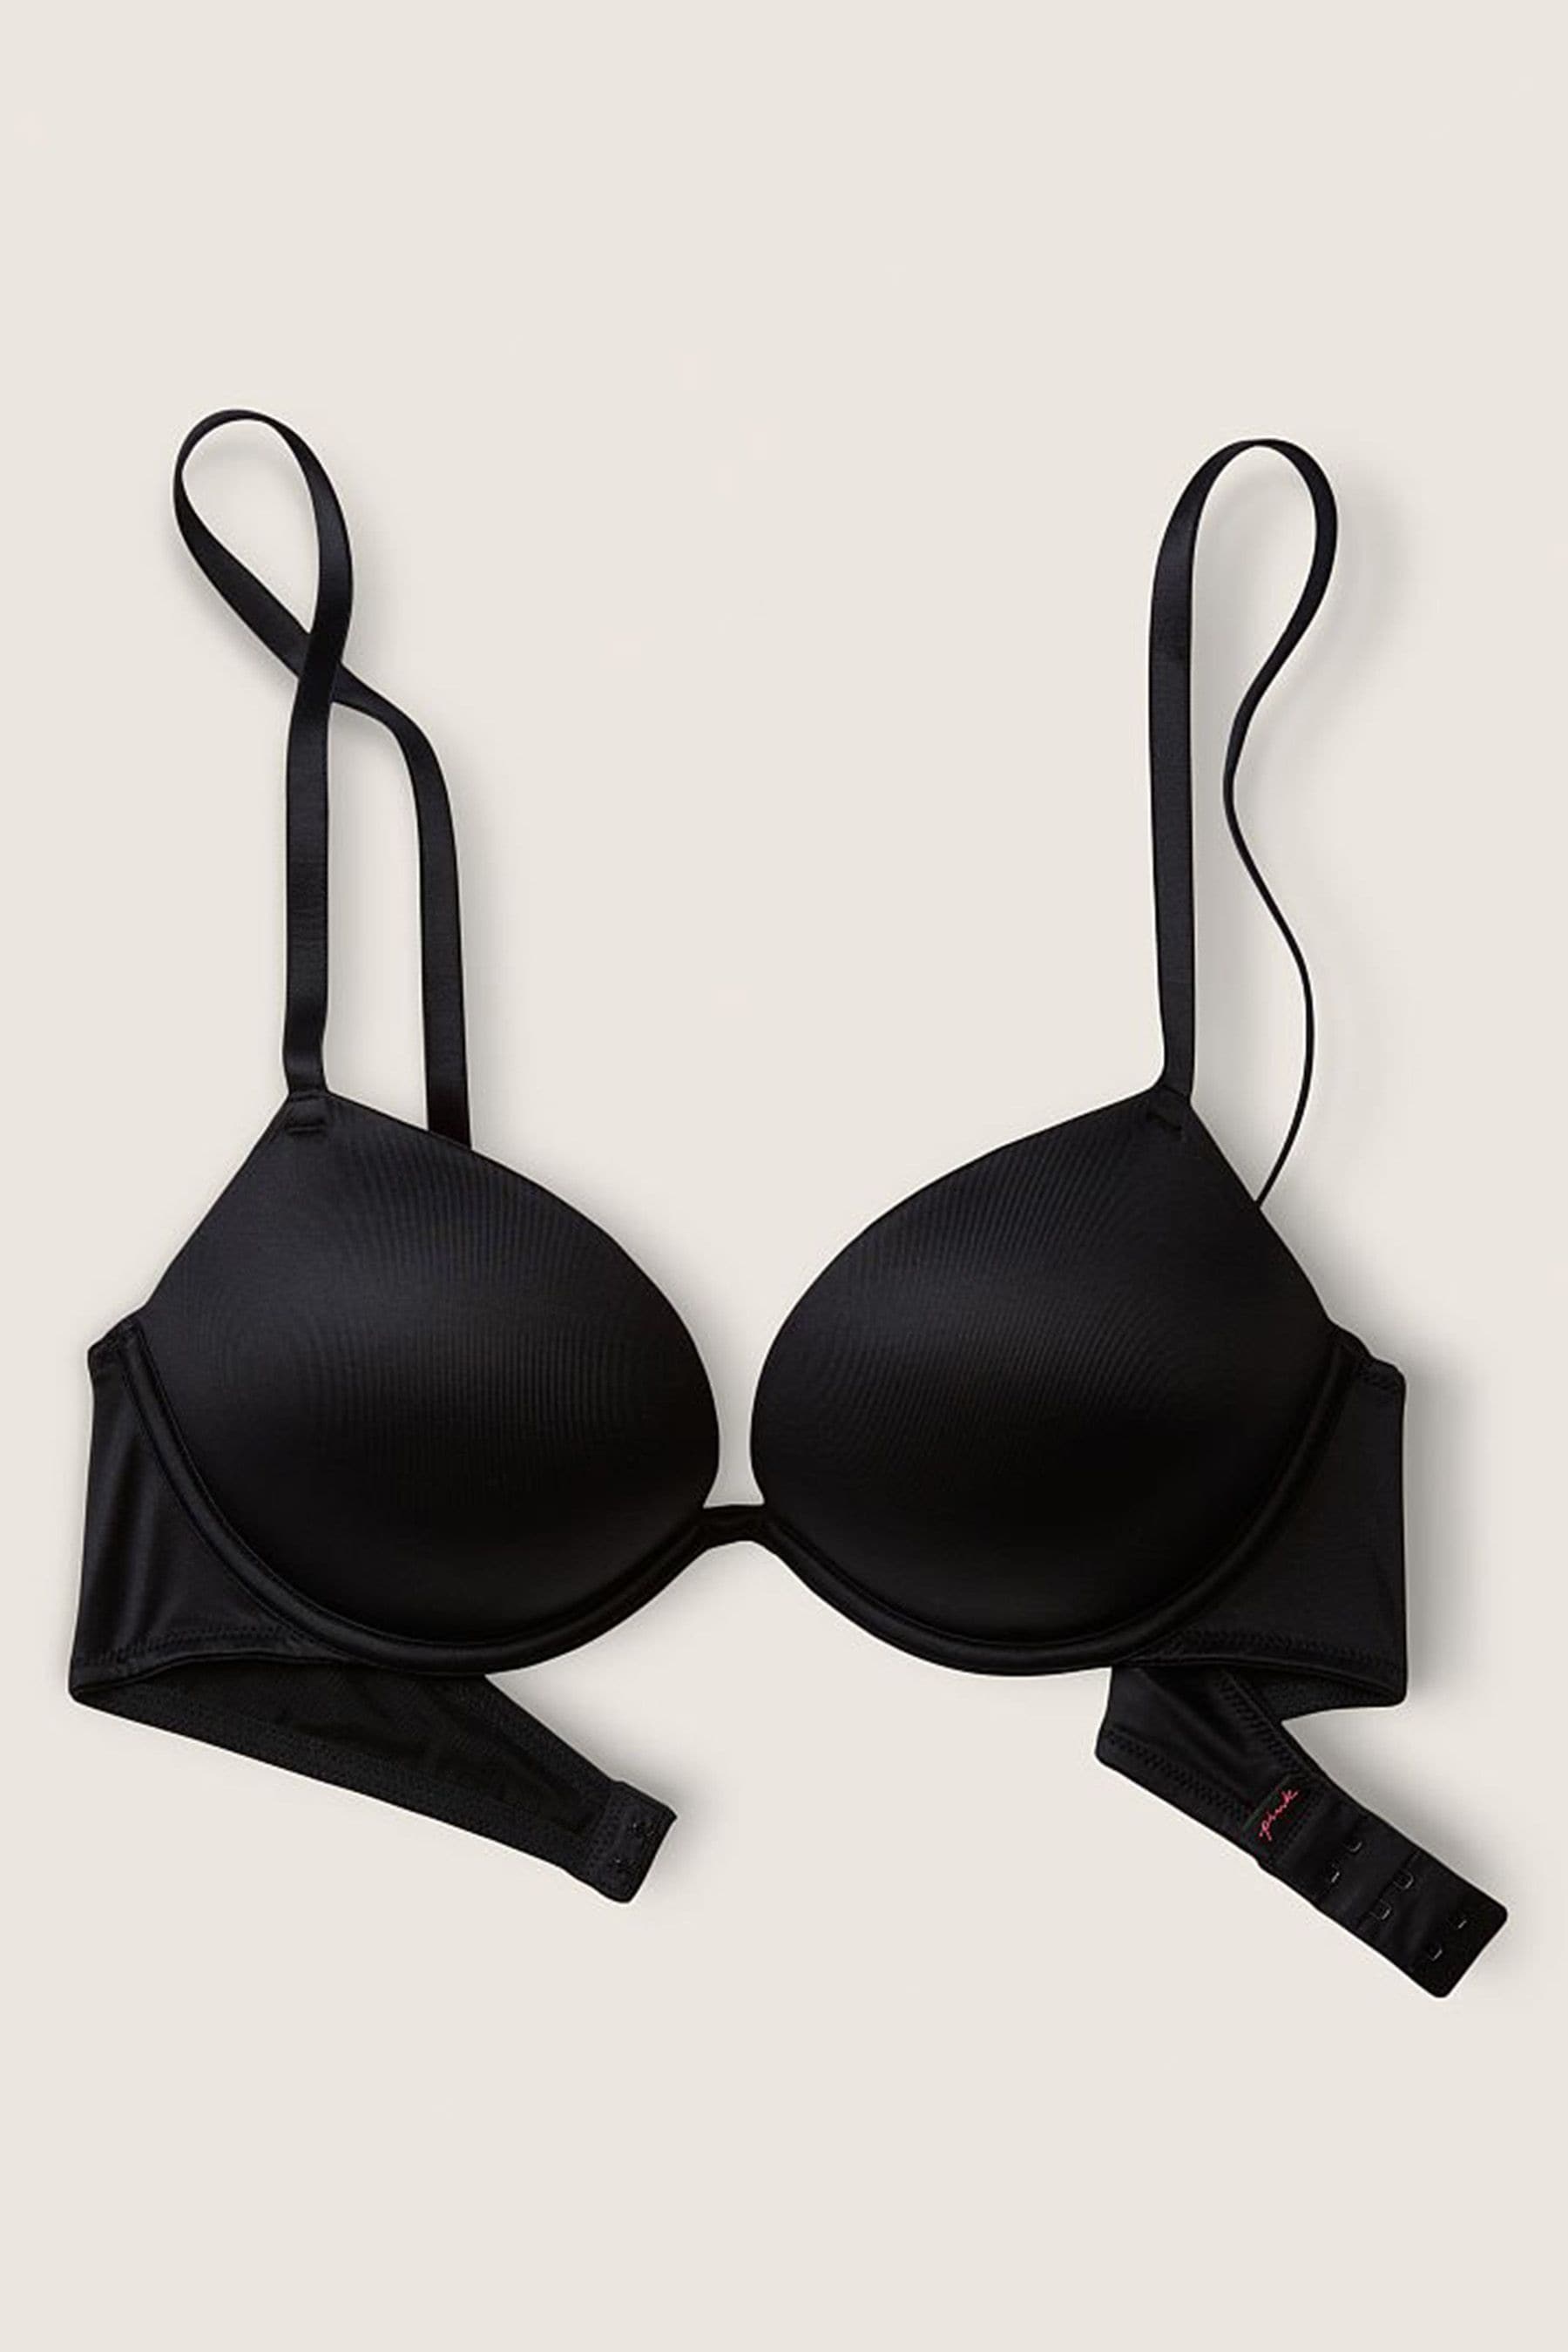 Buy Victoria's Secret PINK Pure Black Smooth Super Push Up Bra from the ...